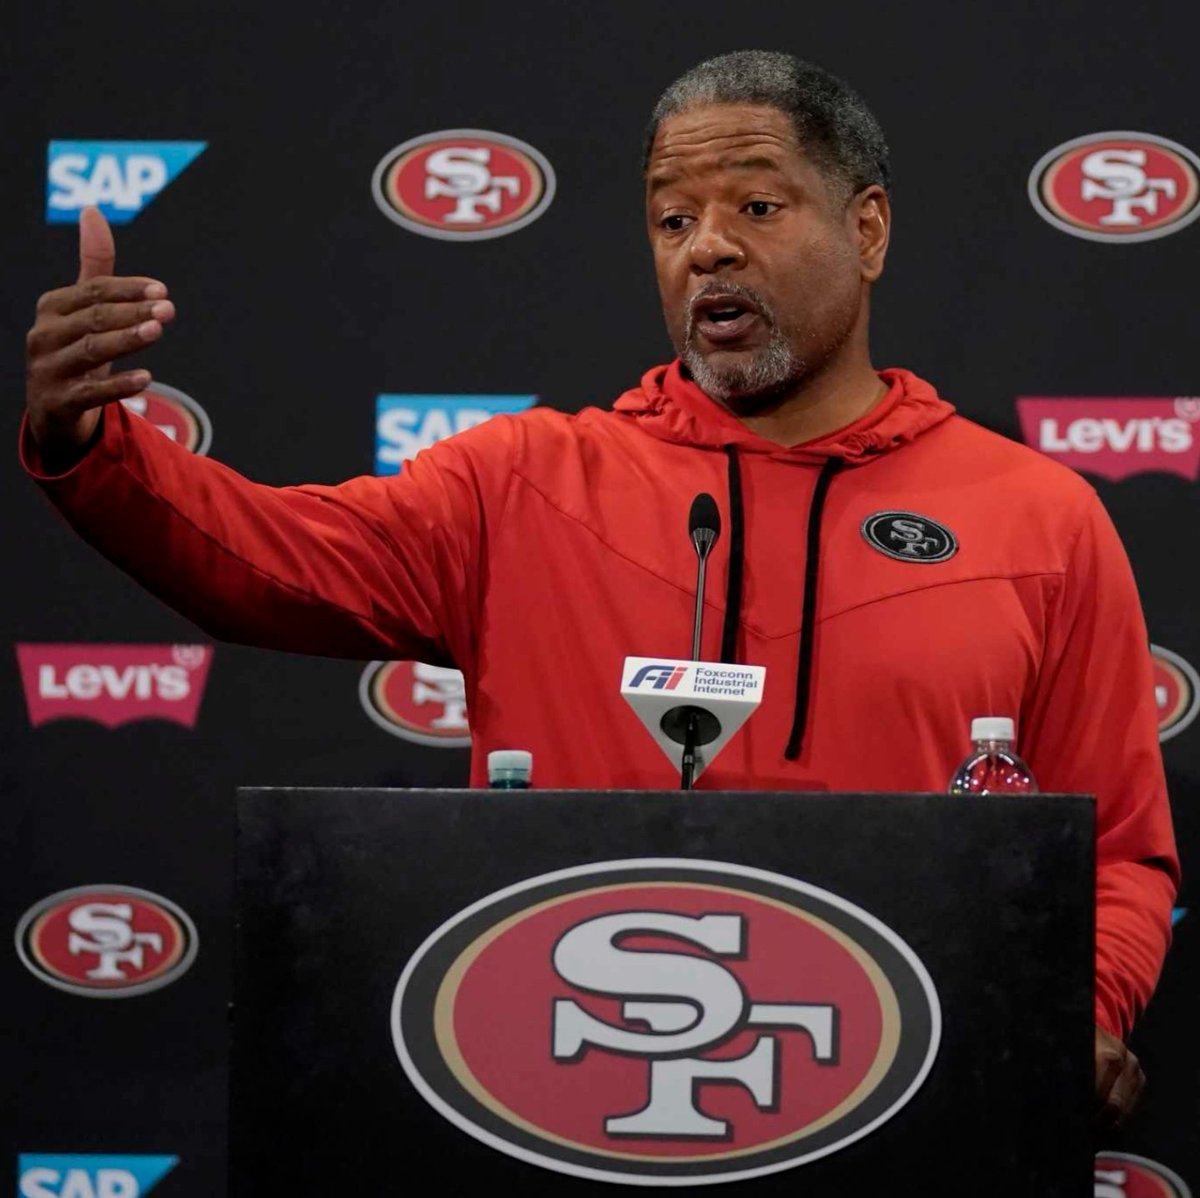 Steve Wilks, the 49ers DC, put some respect on his name!